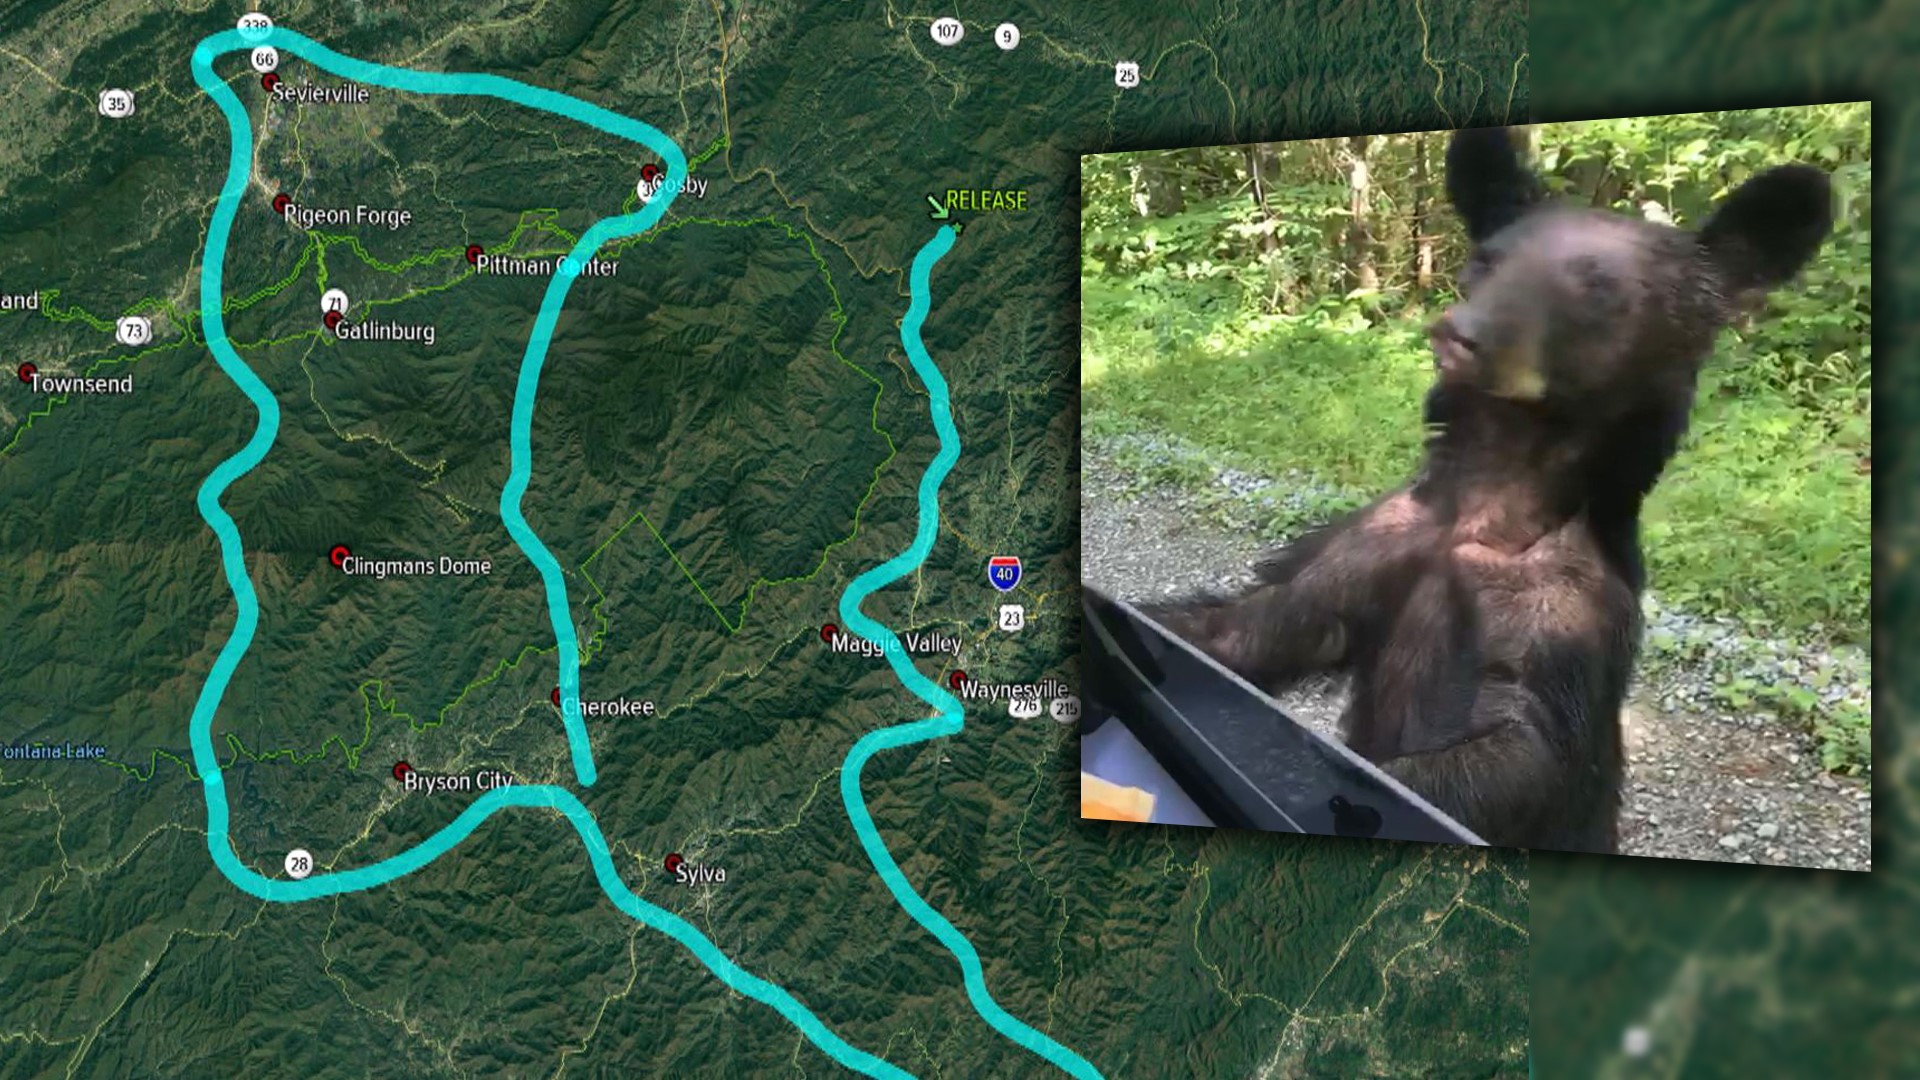 Researchers are getting a head start on a big project to track what happens to bears relocated from the Smokies to national forests.